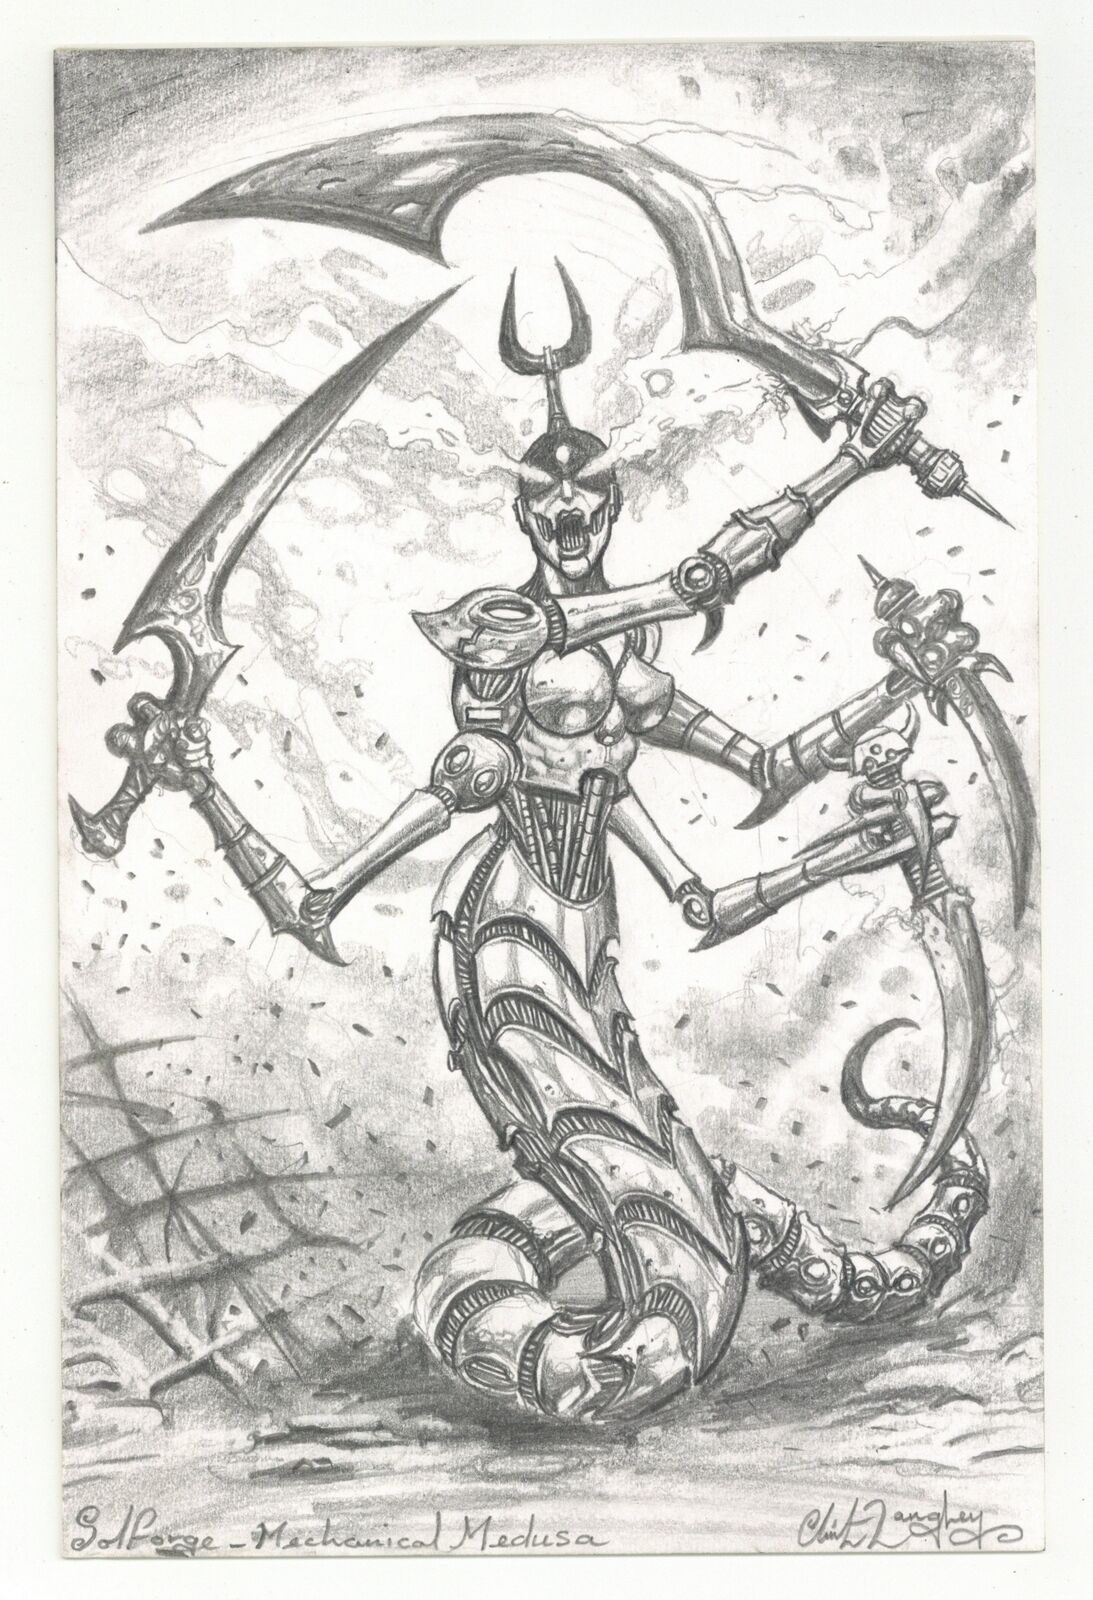 Solforge Mechanical Medusa Sketch by Clint Langley